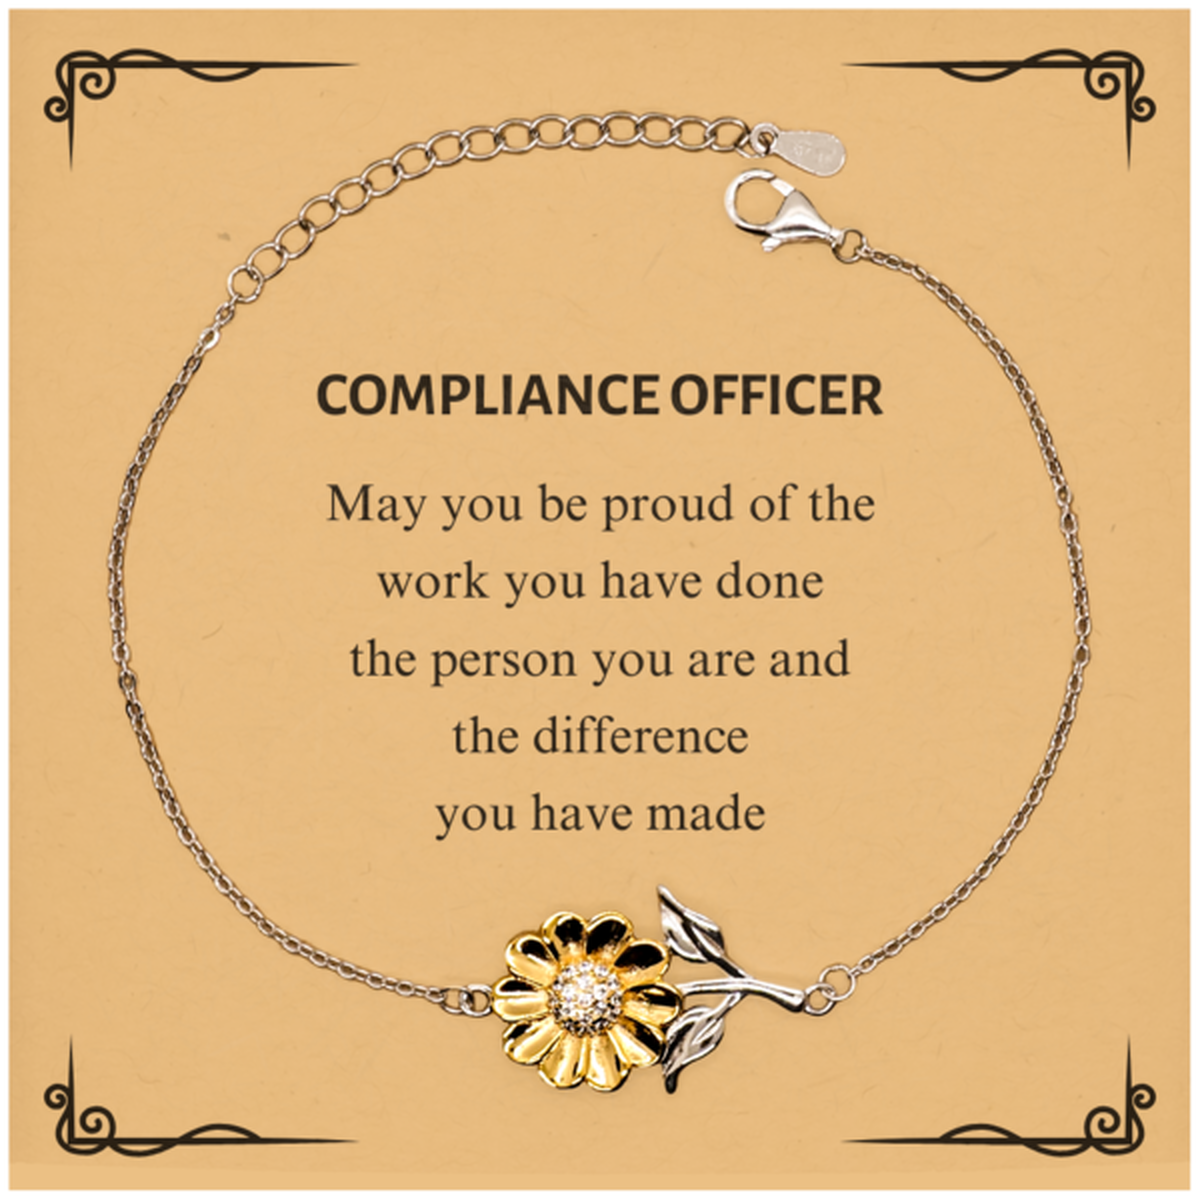 Compliance Officer May you be proud of the work you have done, Retirement Compliance Officer Sunflower Bracelet for Colleague Appreciation Gifts Amazing for Compliance Officer